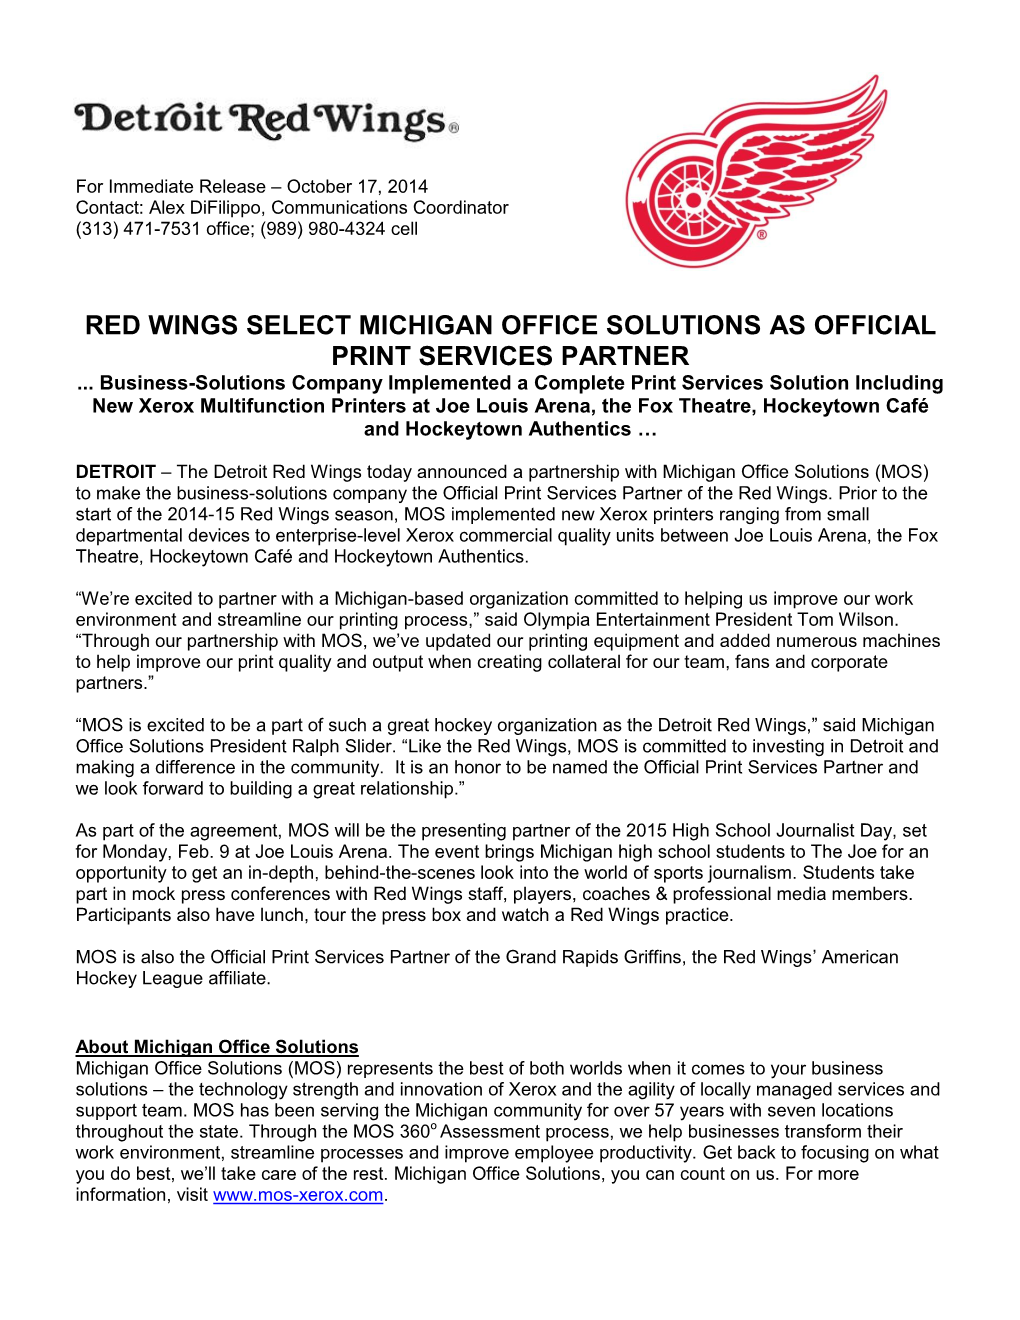 Red Wings Select Michigan Office Solutions As Official Print Services Partner